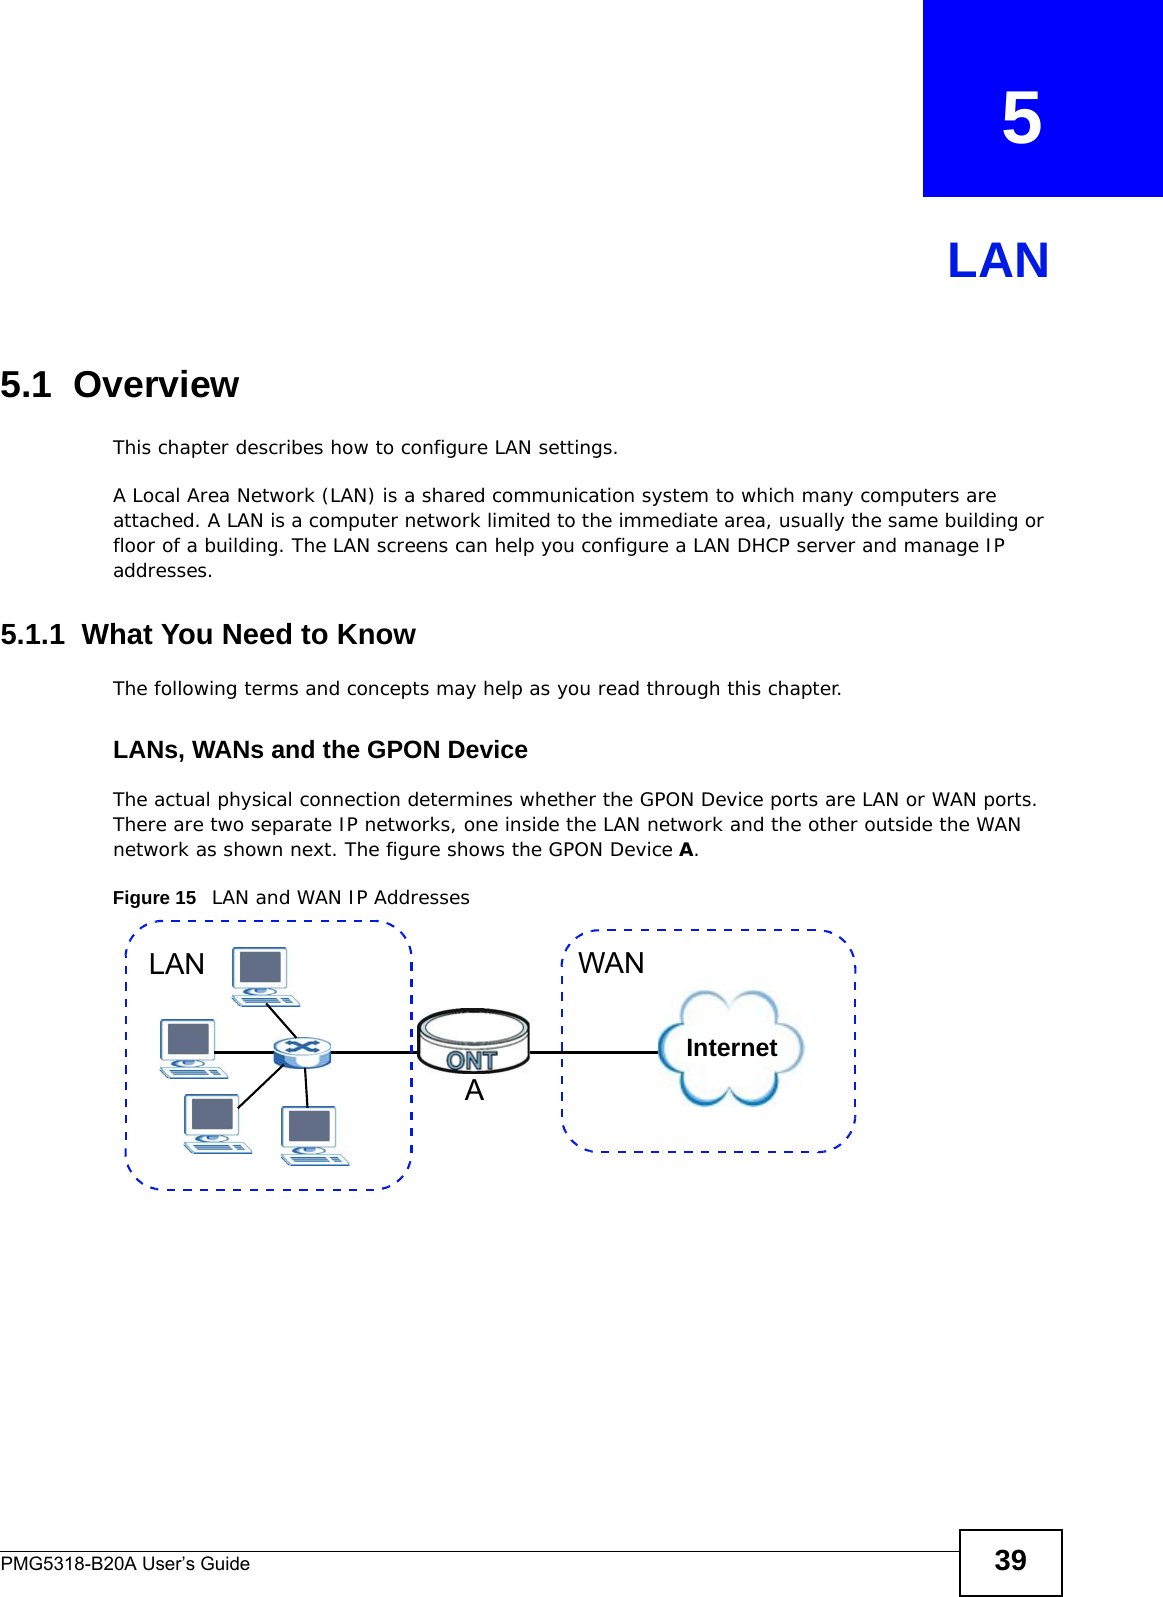 PMG5318-B20A User’s Guide 39CHAPTER   5LAN5.1  Overview This chapter describes how to configure LAN settings.A Local Area Network (LAN) is a shared communication system to which many computers are attached. A LAN is a computer network limited to the immediate area, usually the same building or floor of a building. The LAN screens can help you configure a LAN DHCP server and manage IP addresses.5.1.1  What You Need to KnowThe following terms and concepts may help as you read through this chapter.LANs, WANs and the GPON DeviceThe actual physical connection determines whether the GPON Device ports are LAN or WAN ports. There are two separate IP networks, one inside the LAN network and the other outside the WAN network as shown next. The figure shows the GPON Device A.Figure 15   LAN and WAN IP Addresses InternetLAN WANA